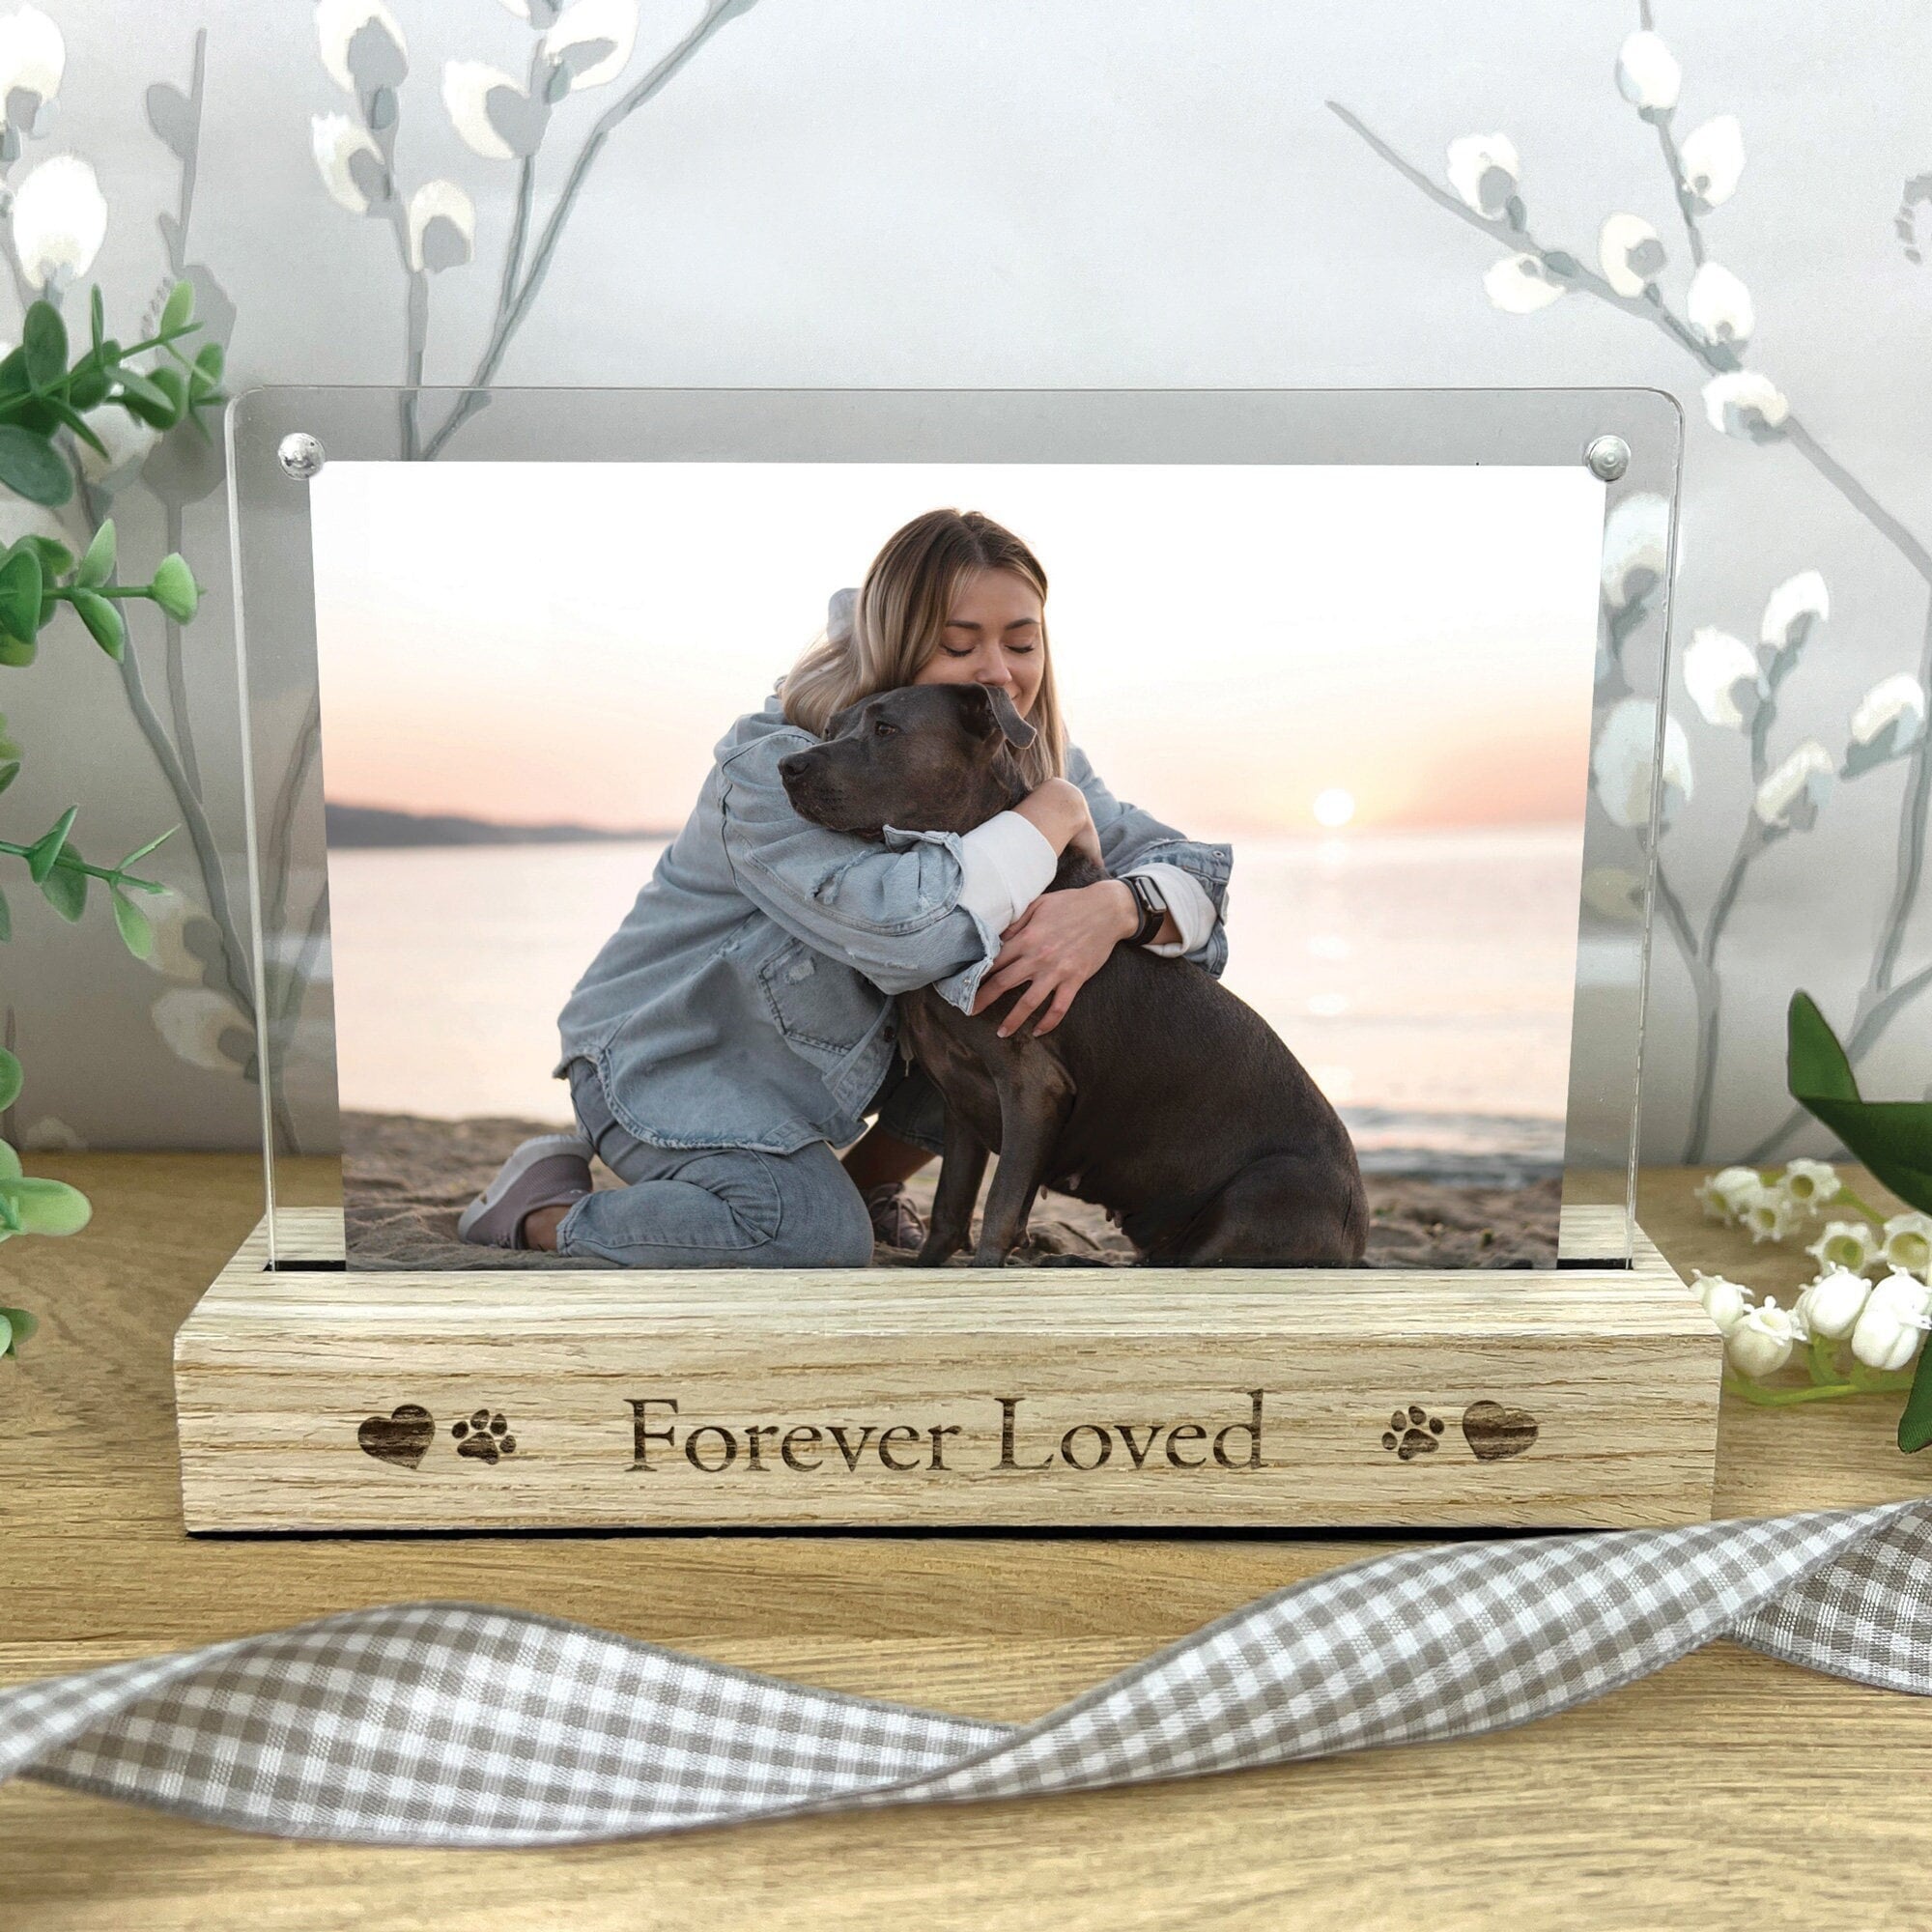 Scribble Acrylic Photo Block 4 x 6 Frame. Clear Free-Standing Desktop  Double Sided Magnetic Picture Display.